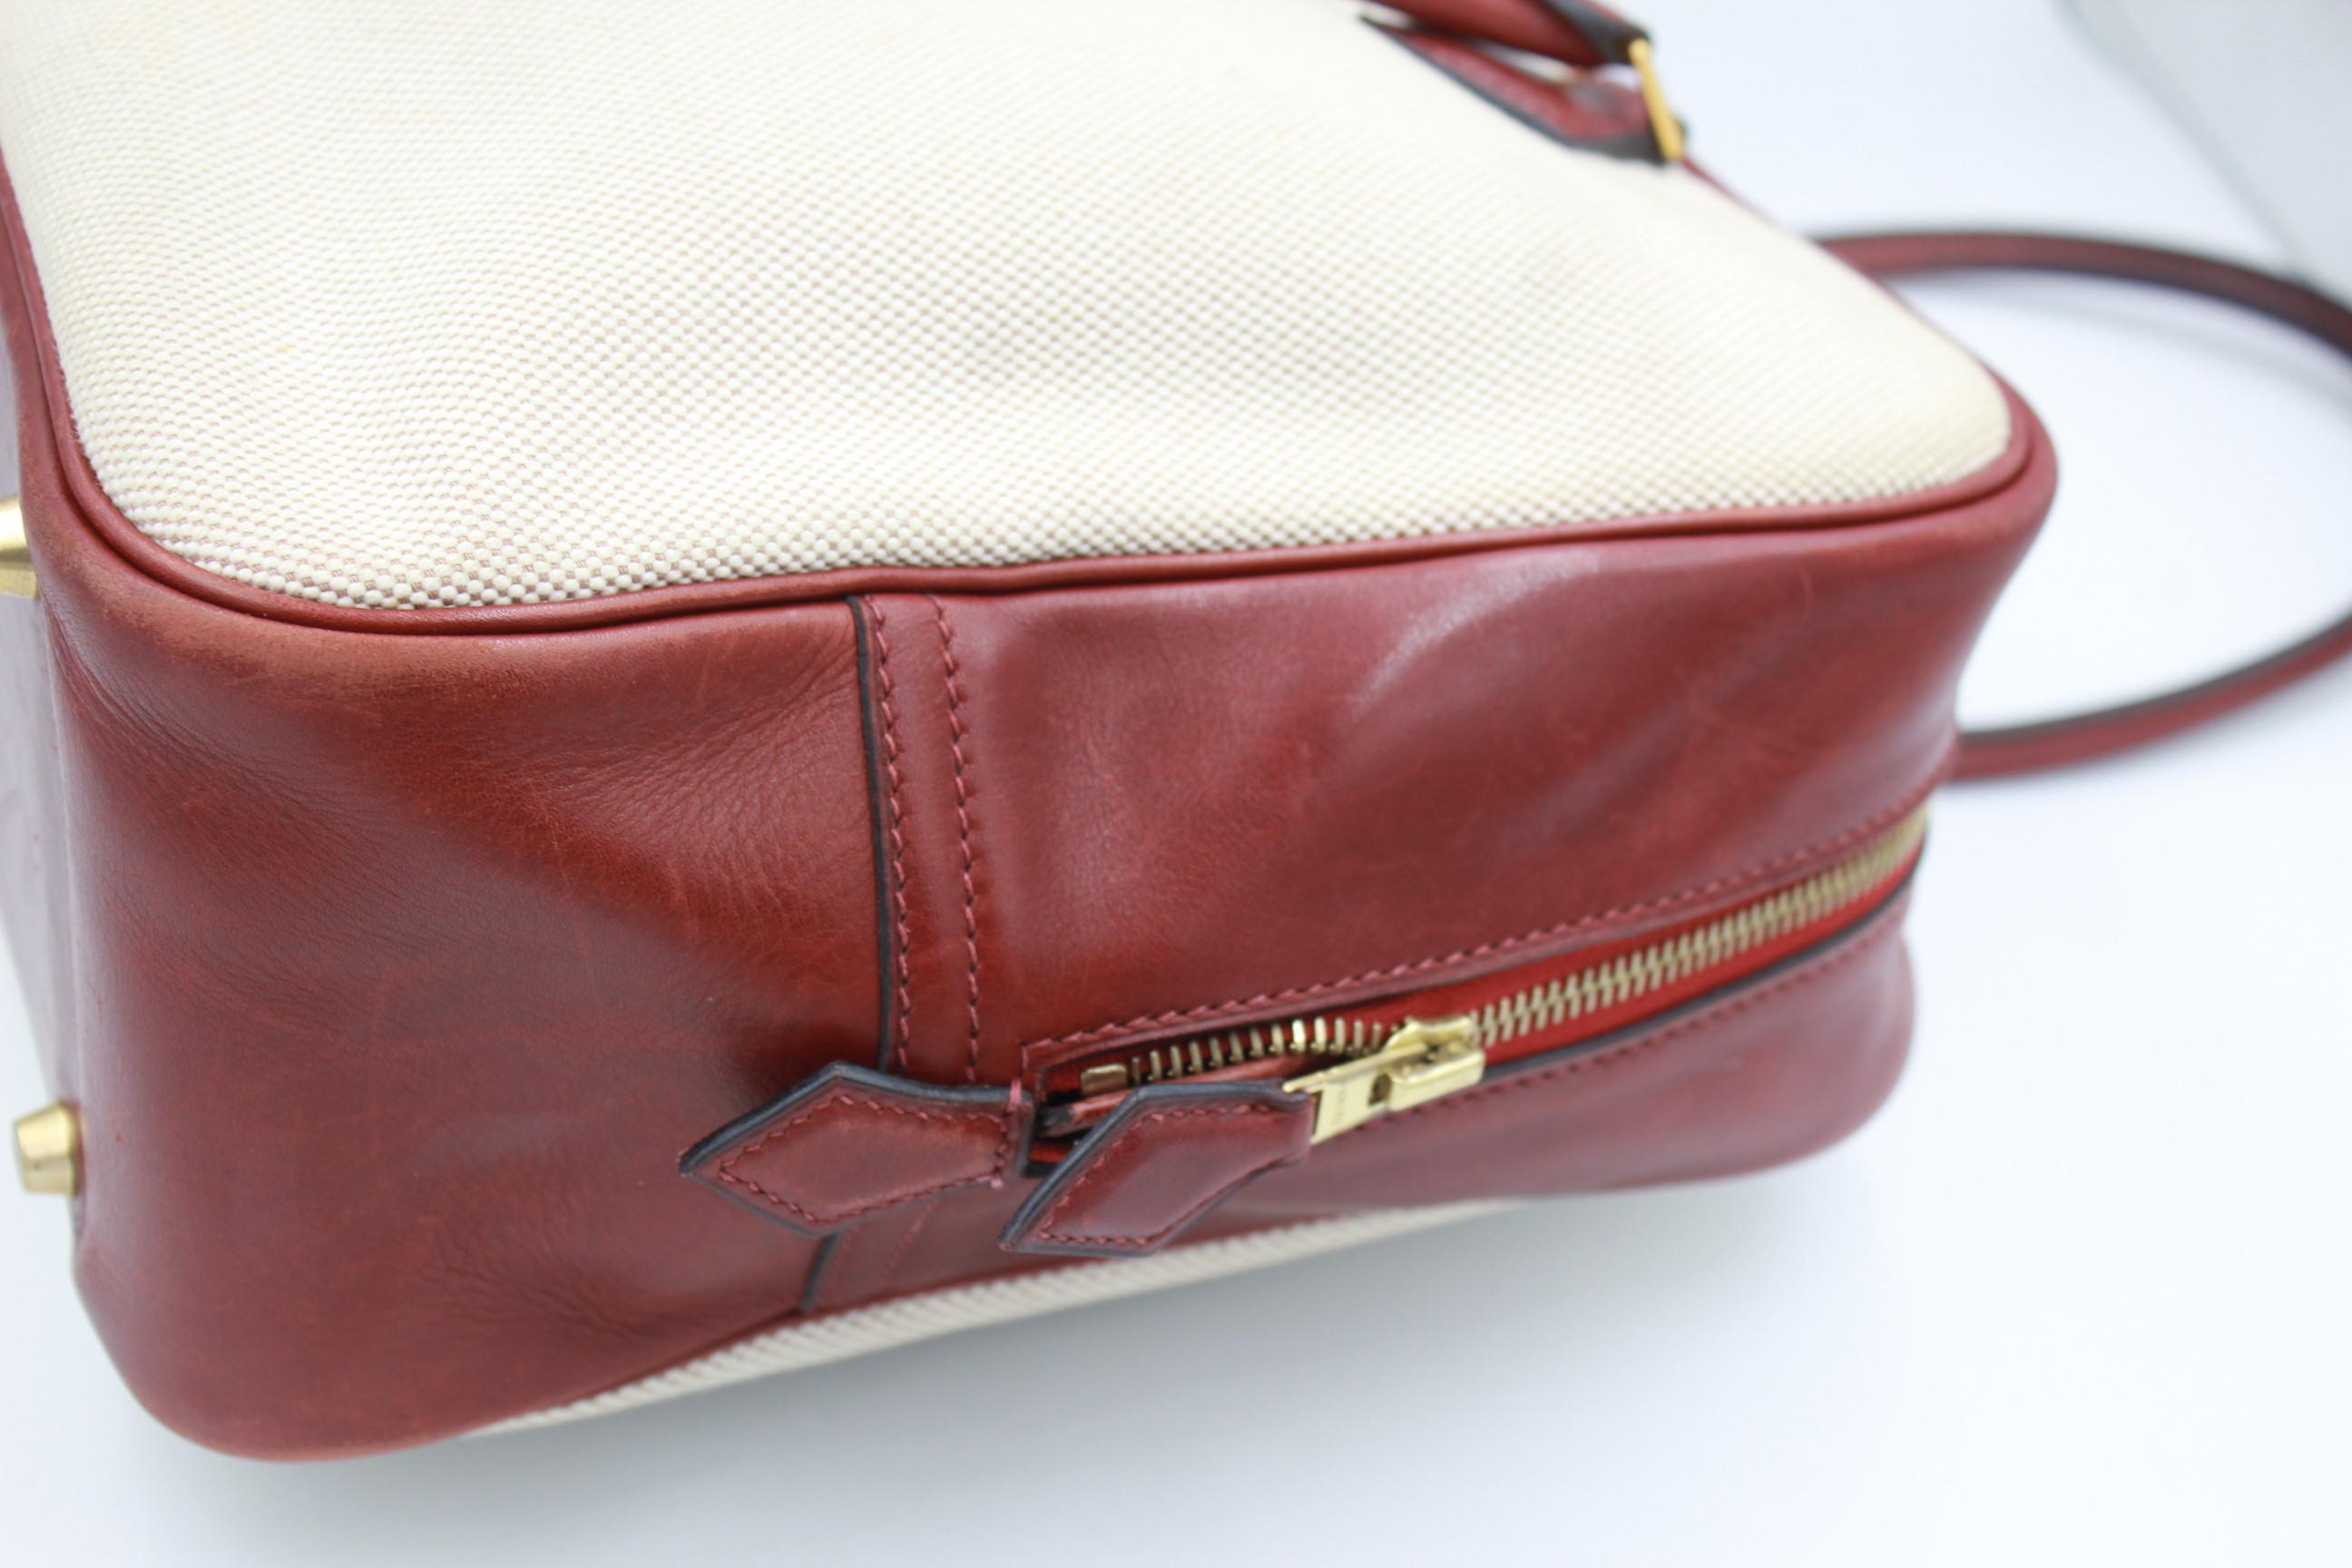 Hermes Plume 32 in Dark Red Leather and Canvas im Zustand „Gut“ in Paris, FR